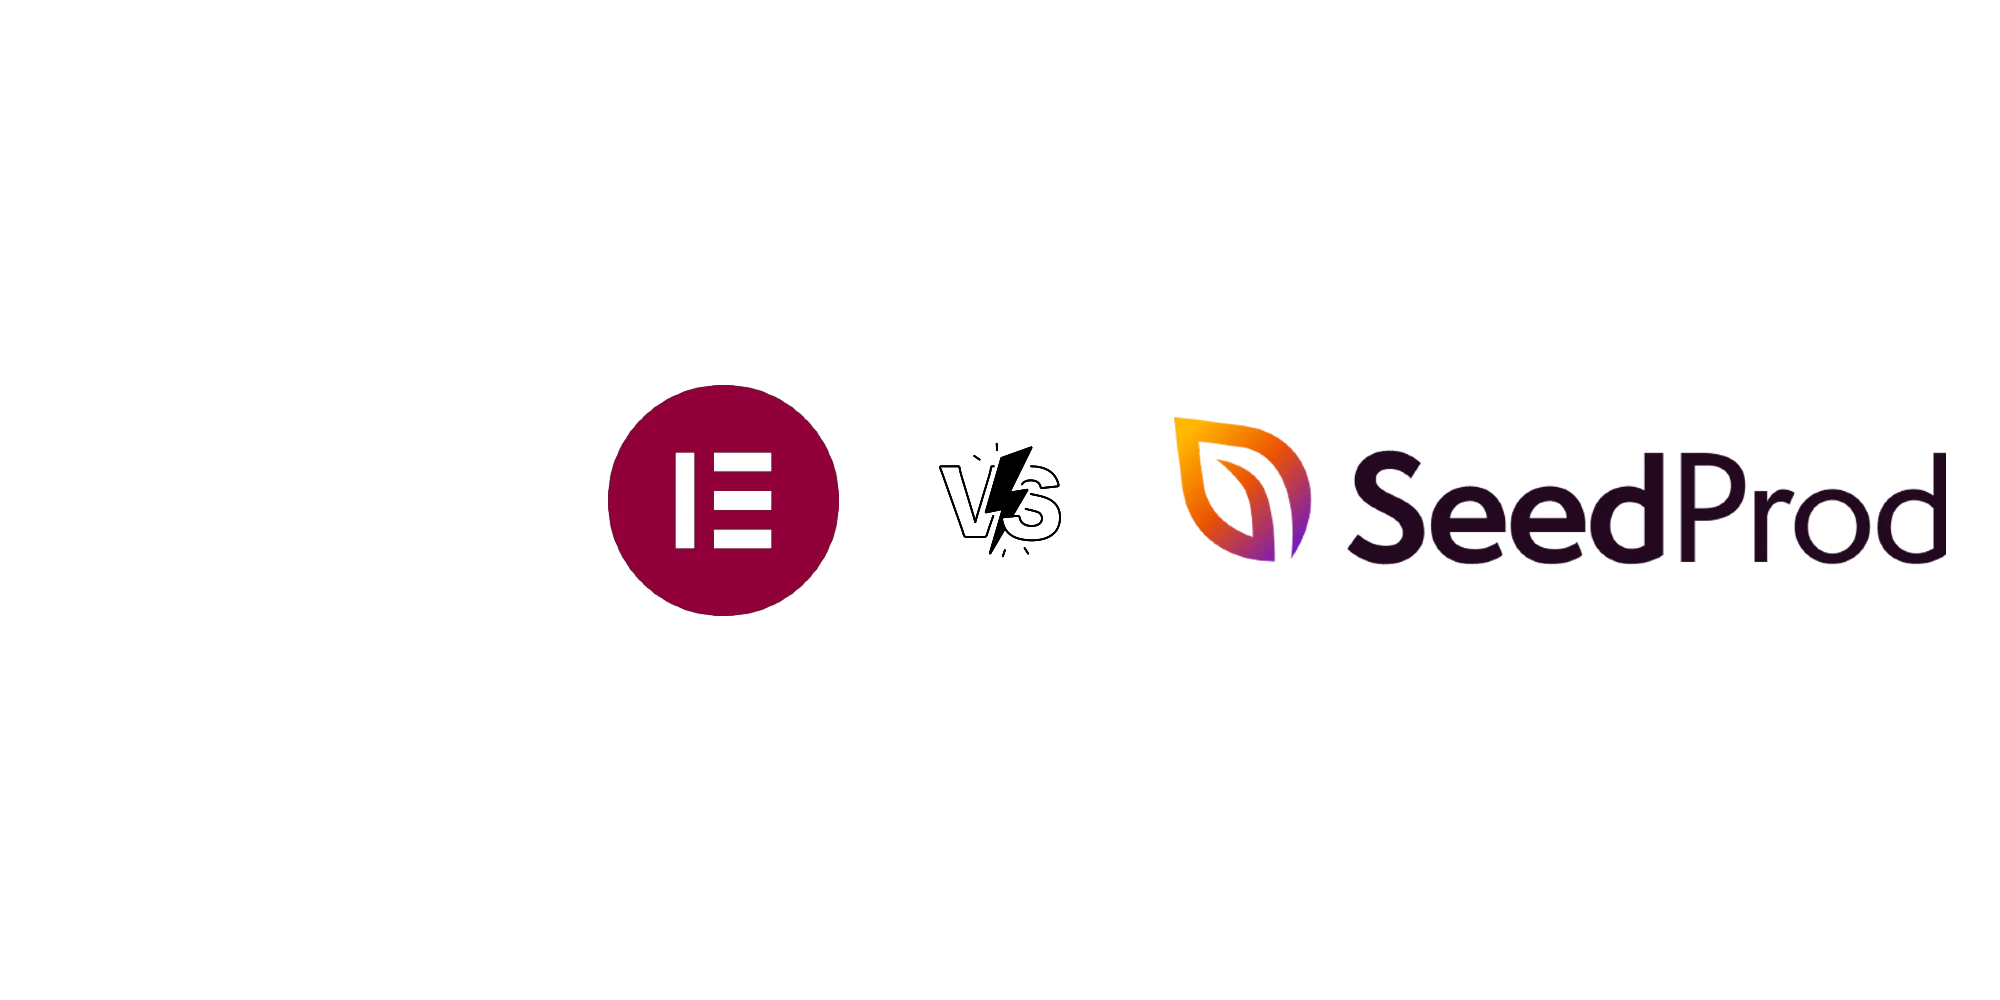 SeedProd vs Elementor: Which has better features?